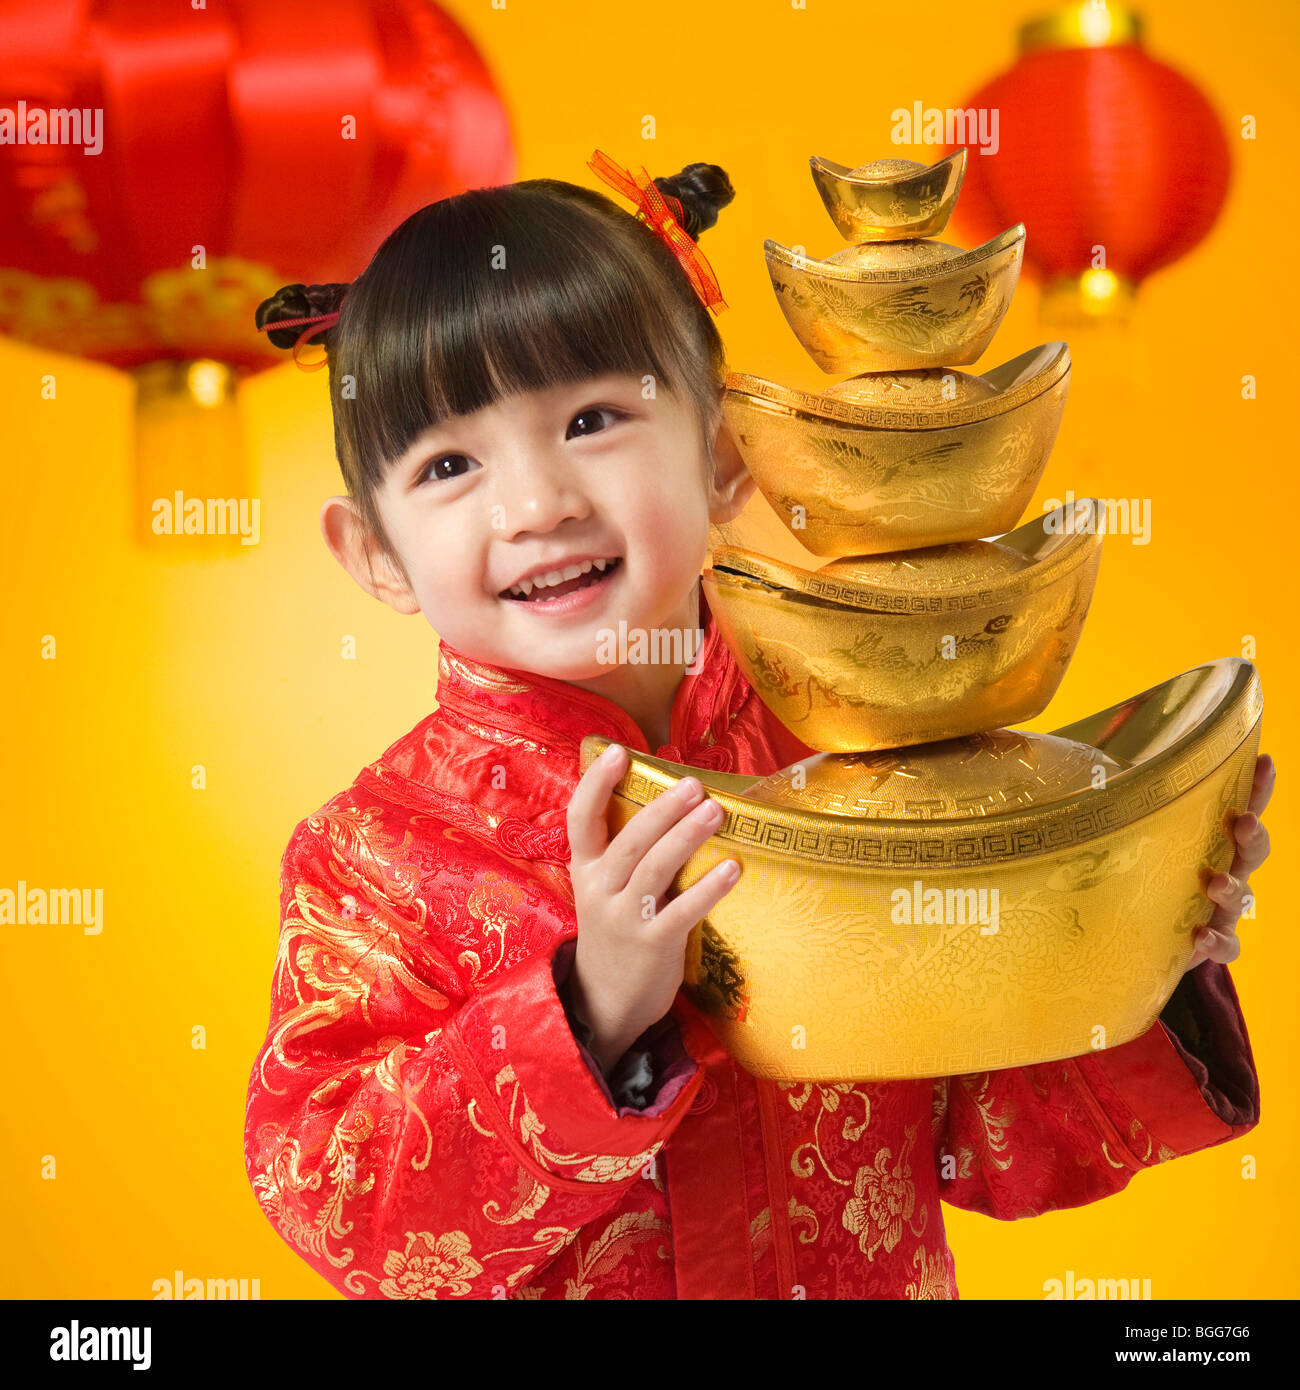 Girl in Chinese traditional clothes holding gold ingot Stock Photo